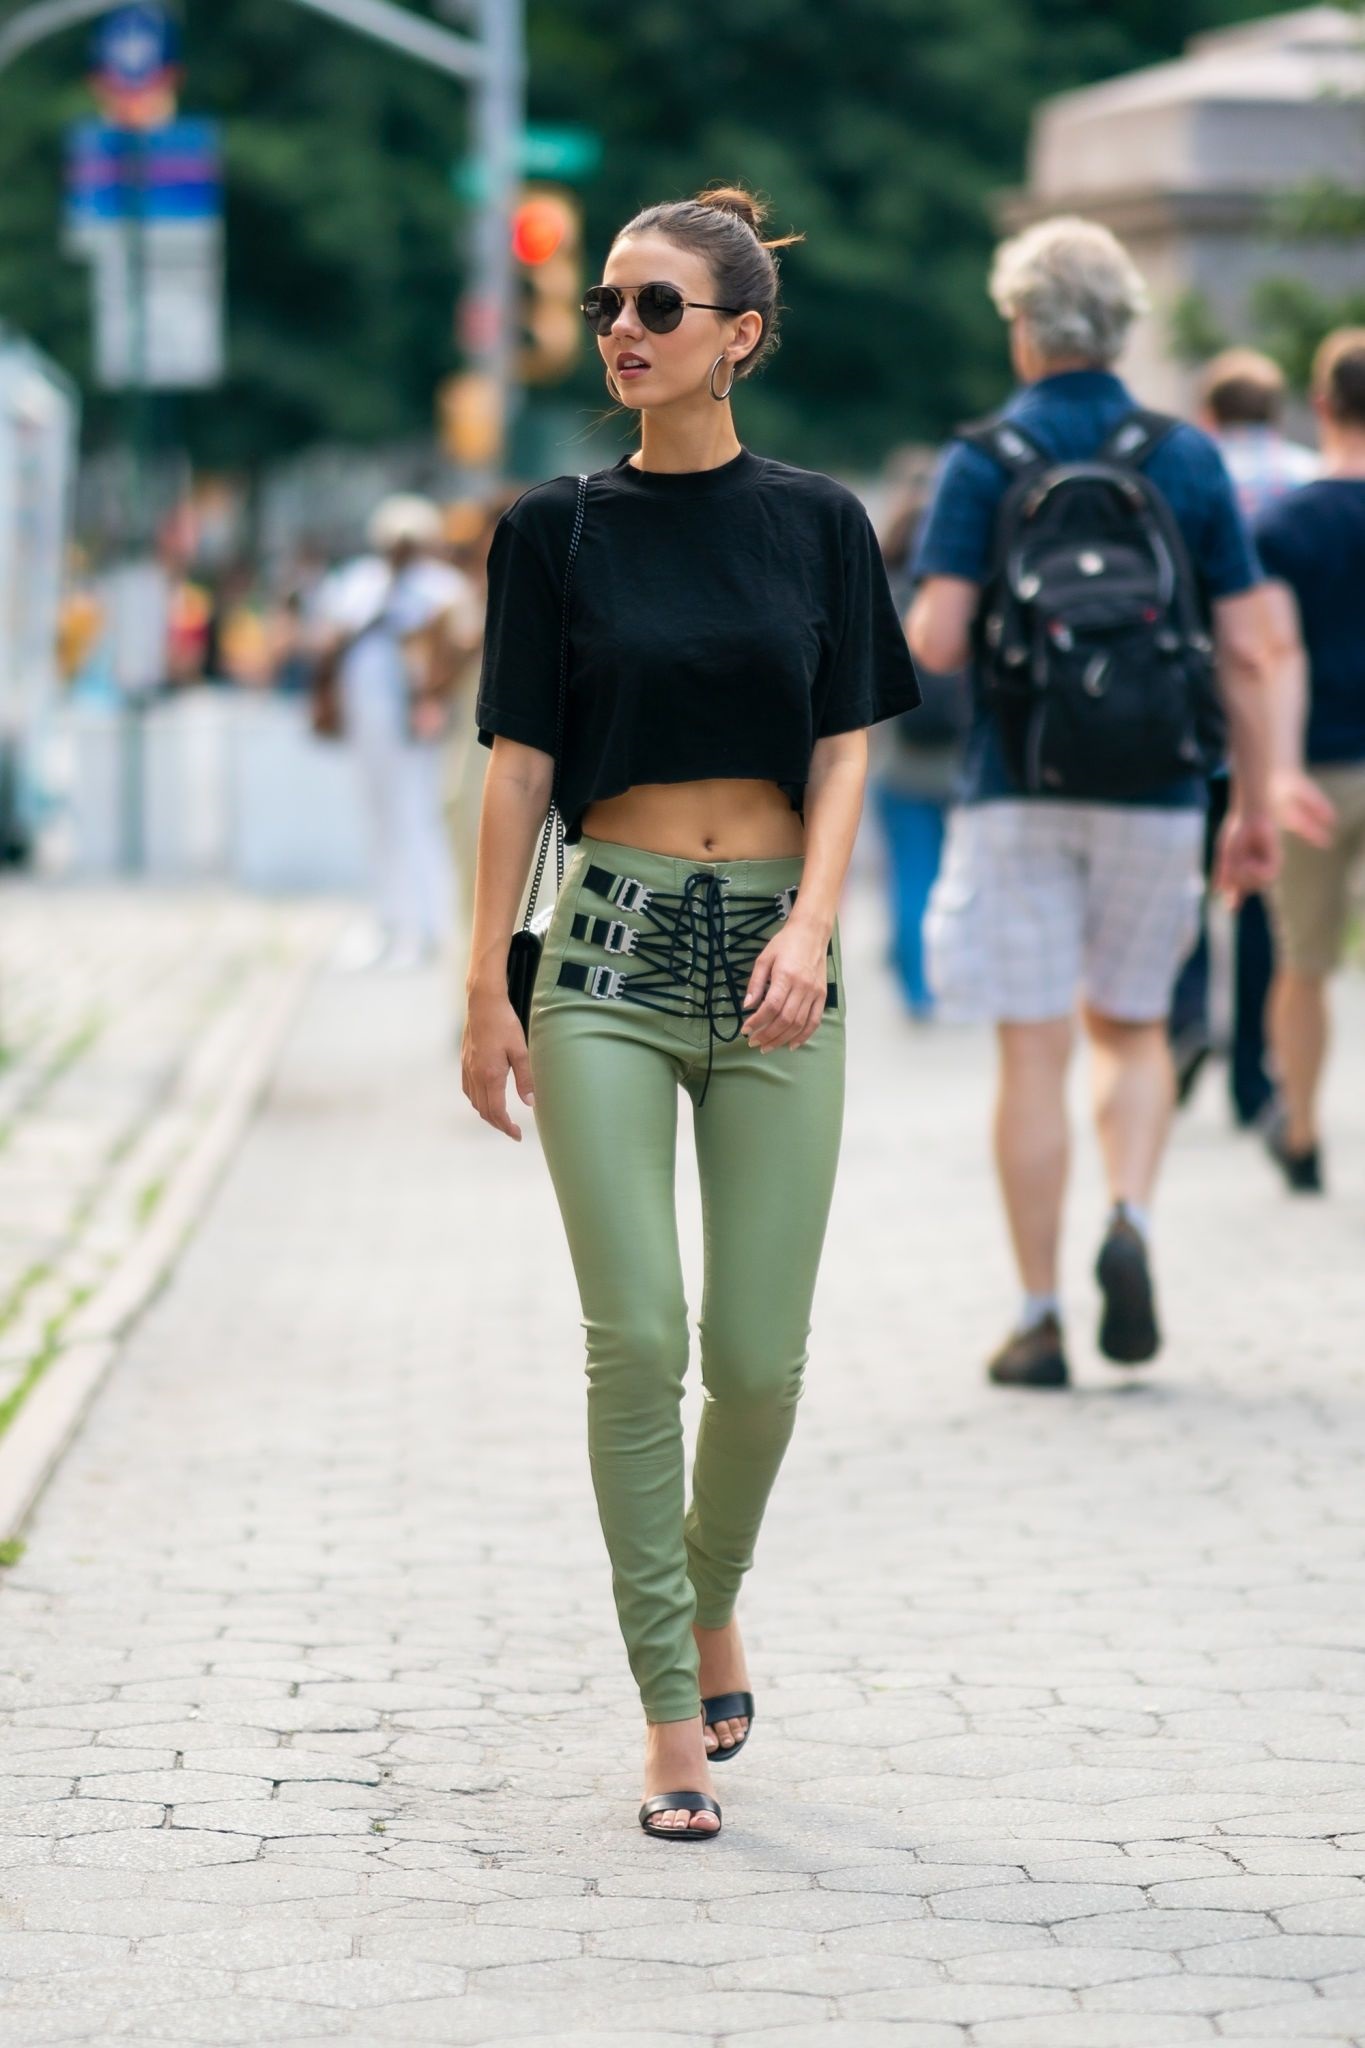 Victoria Justice Shows Her Navel While Walking In Street Of NYC Set 2